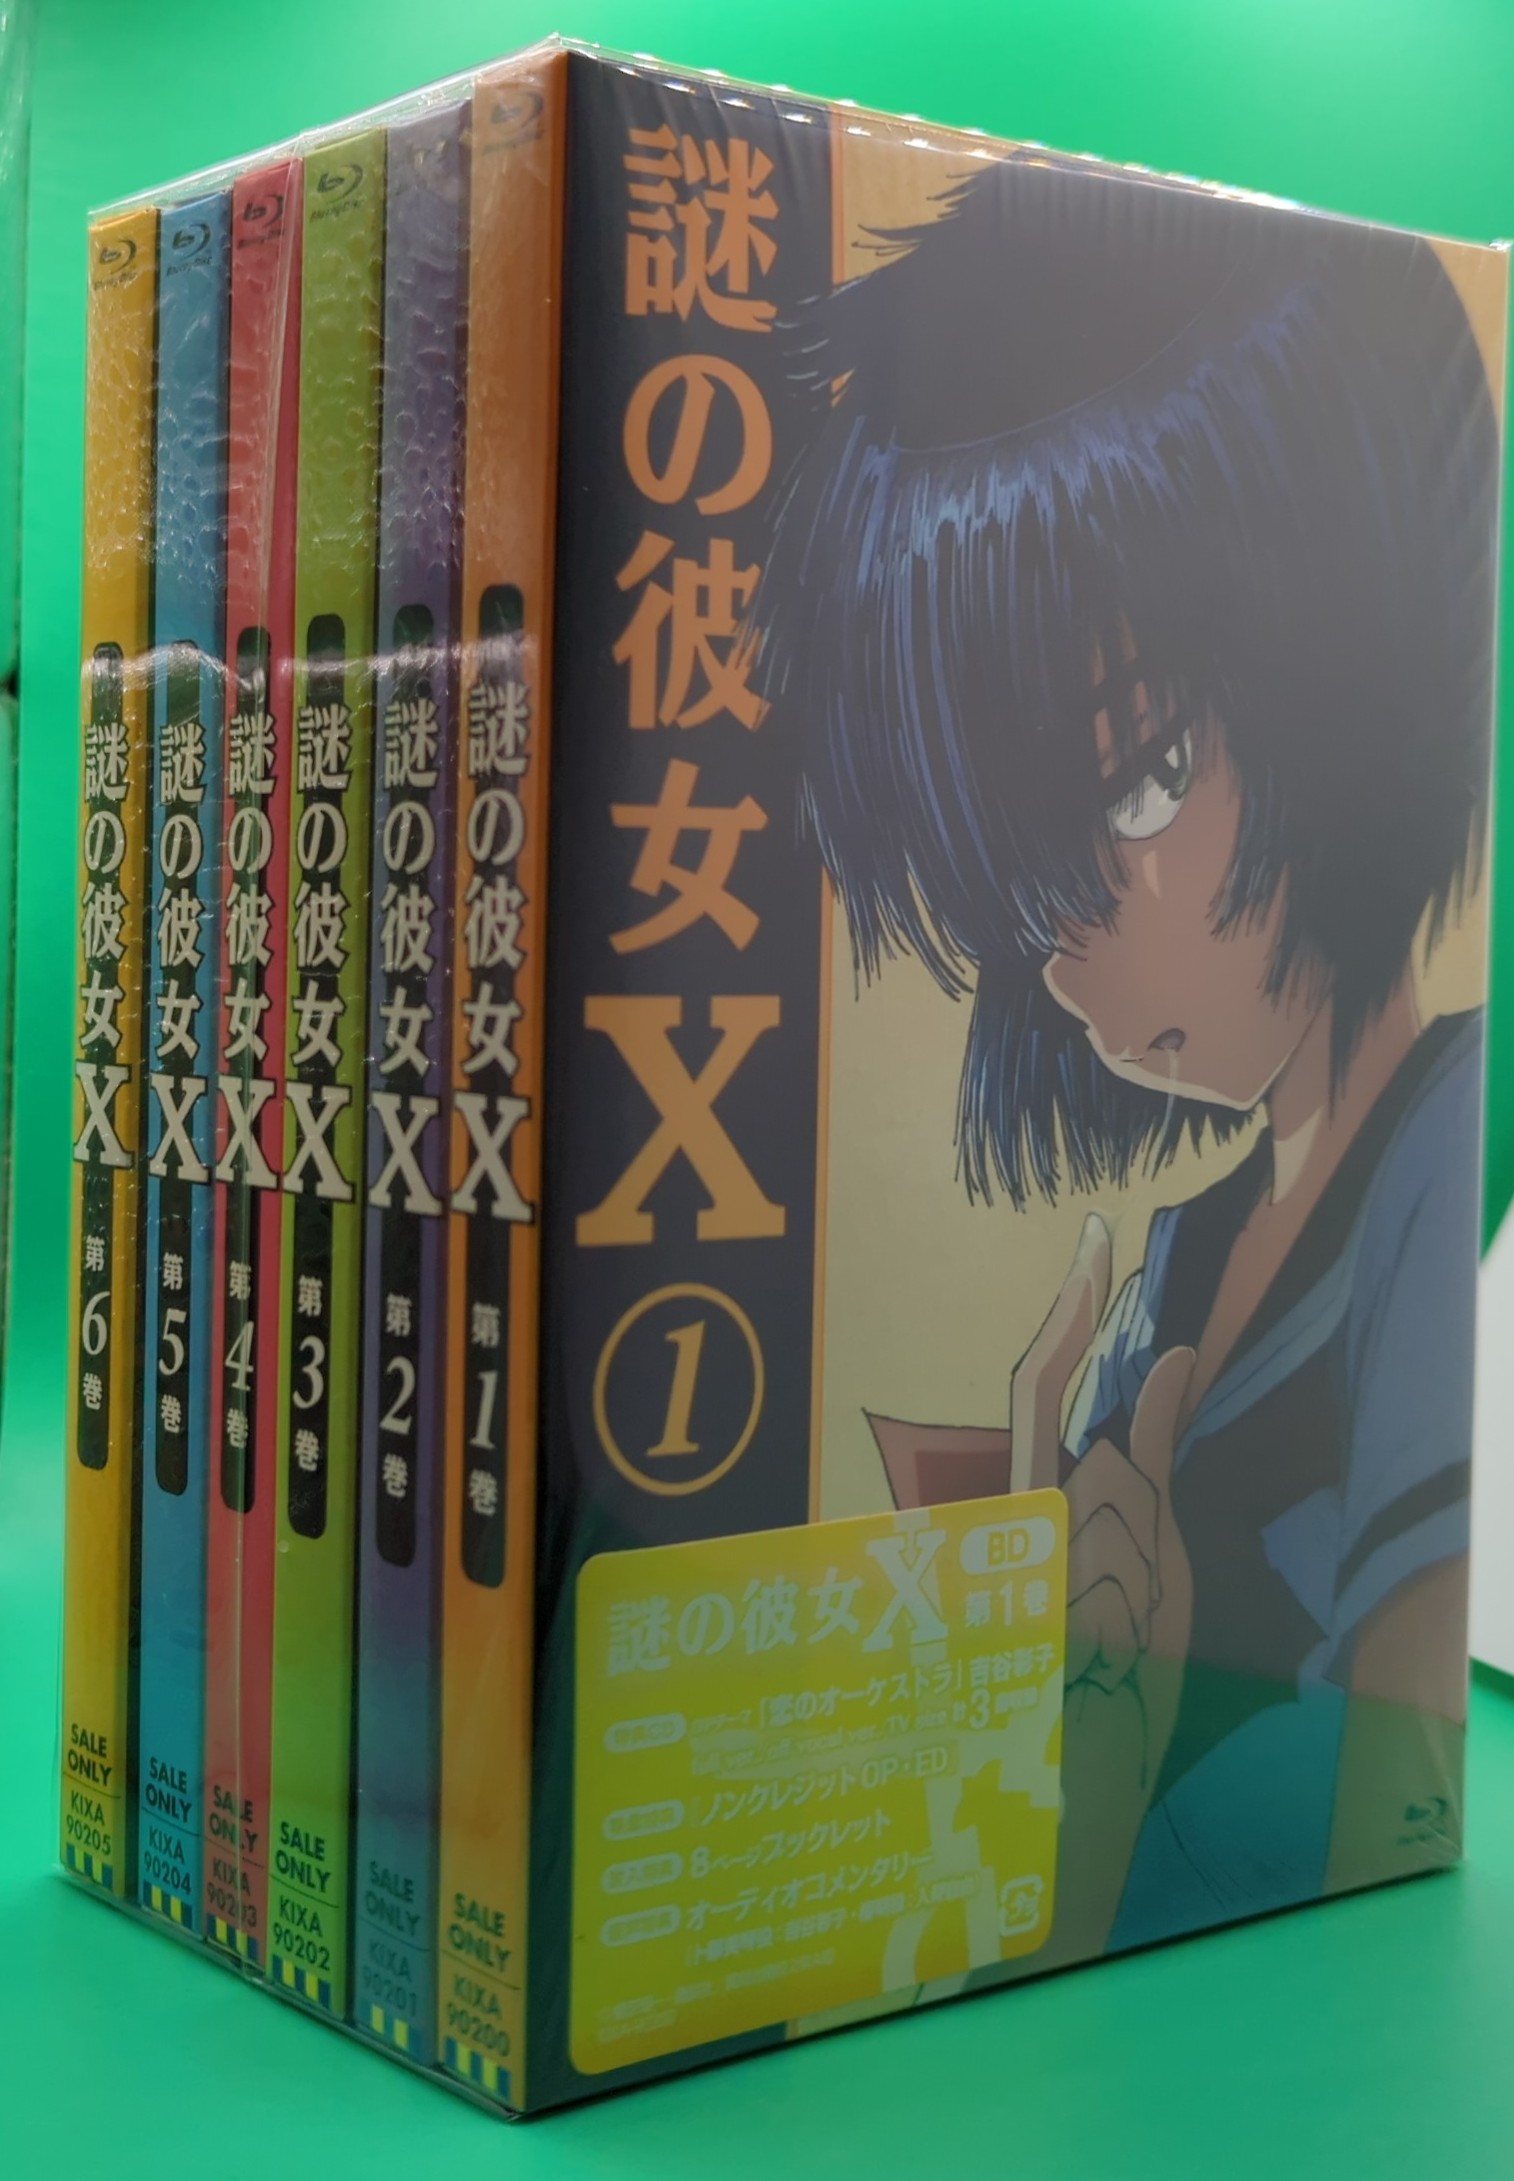 Mysterious Girlfriend X complete series / NEW anime on Blu-ray